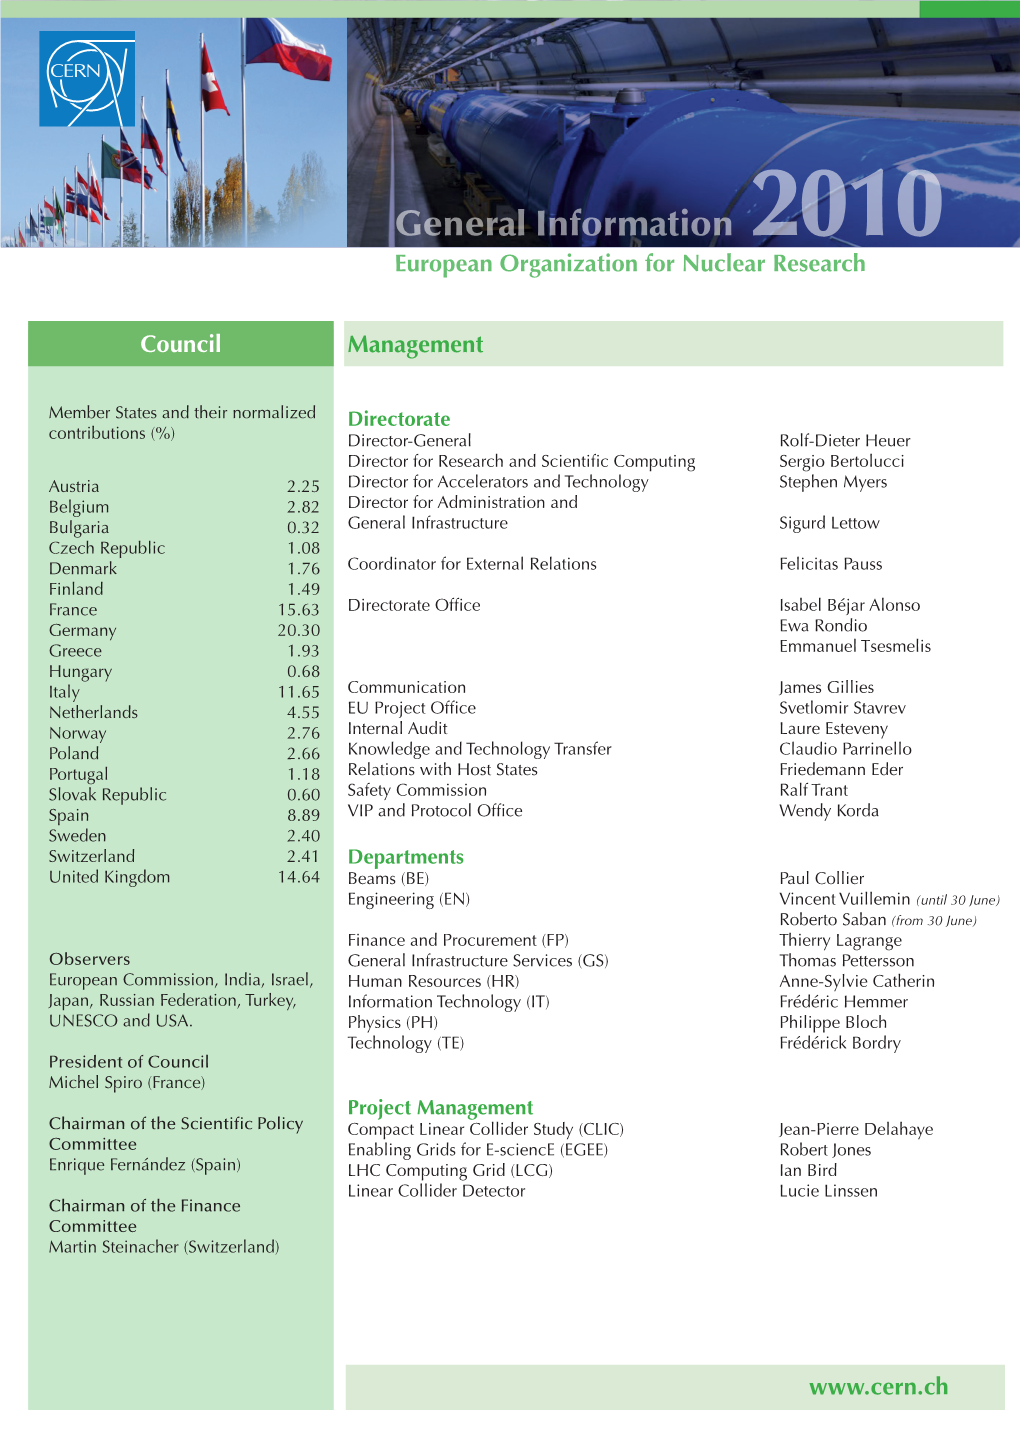 General Information 2010 European Organization for Nuclear Research